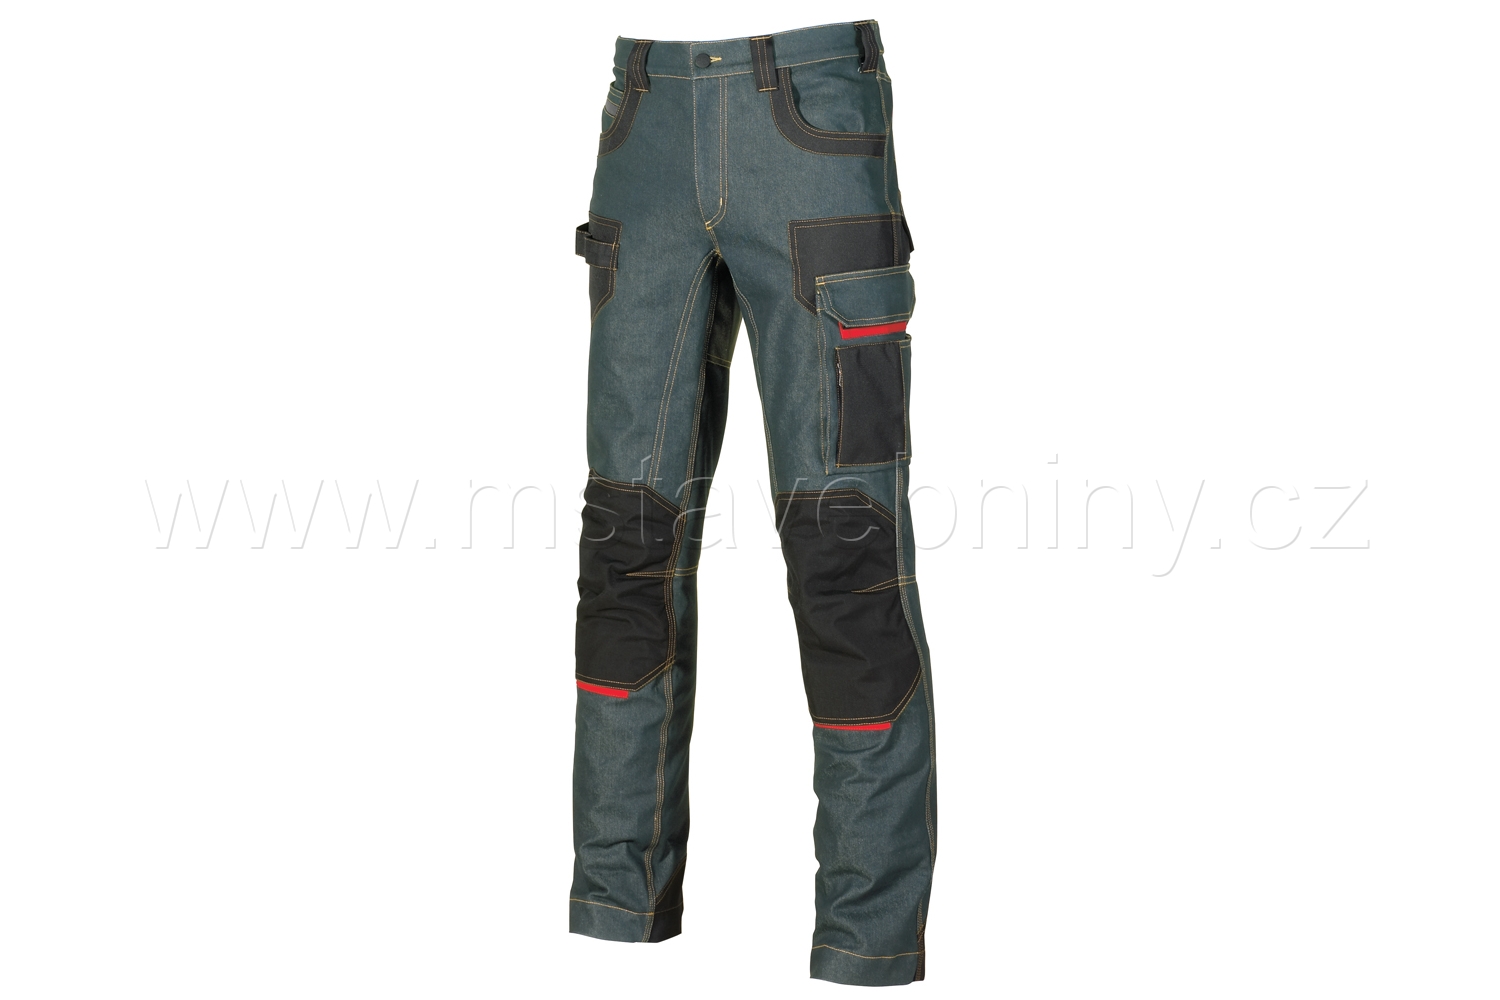 Kalhoty pasové PLATINUM BUTTON EXCITING rust jeans